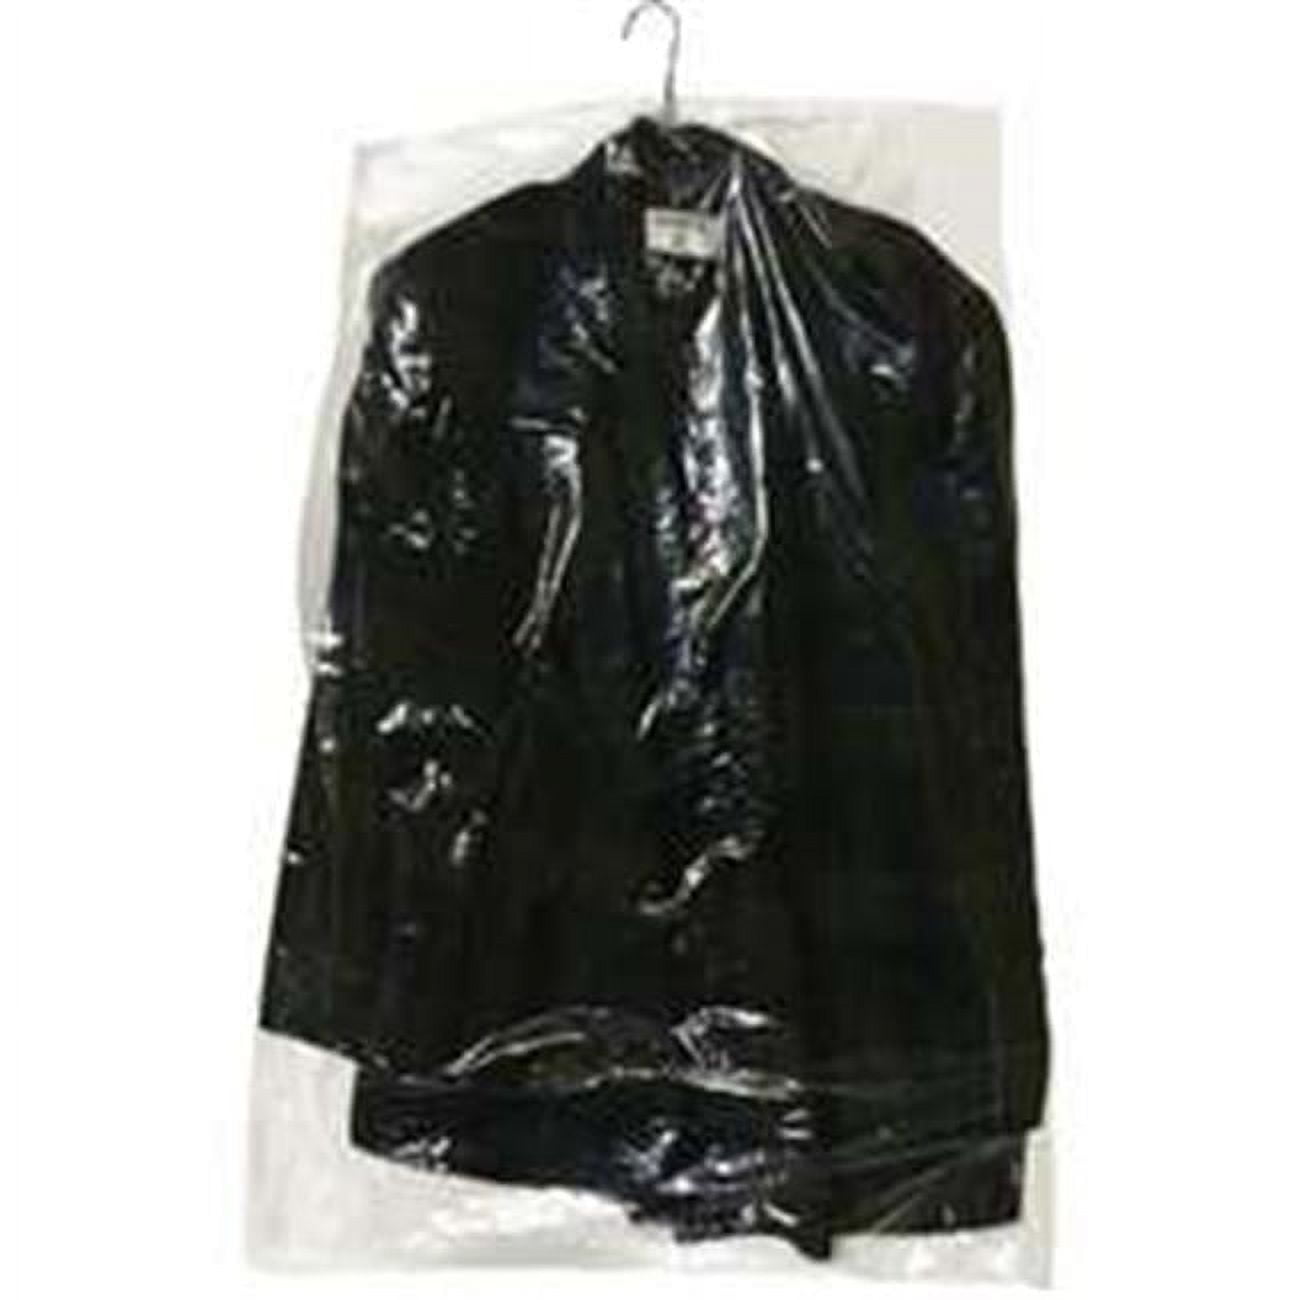 Gb21772 21 X 7 X 72 In. 0.6 Mil Garment Bags, Clear - Case Of 260